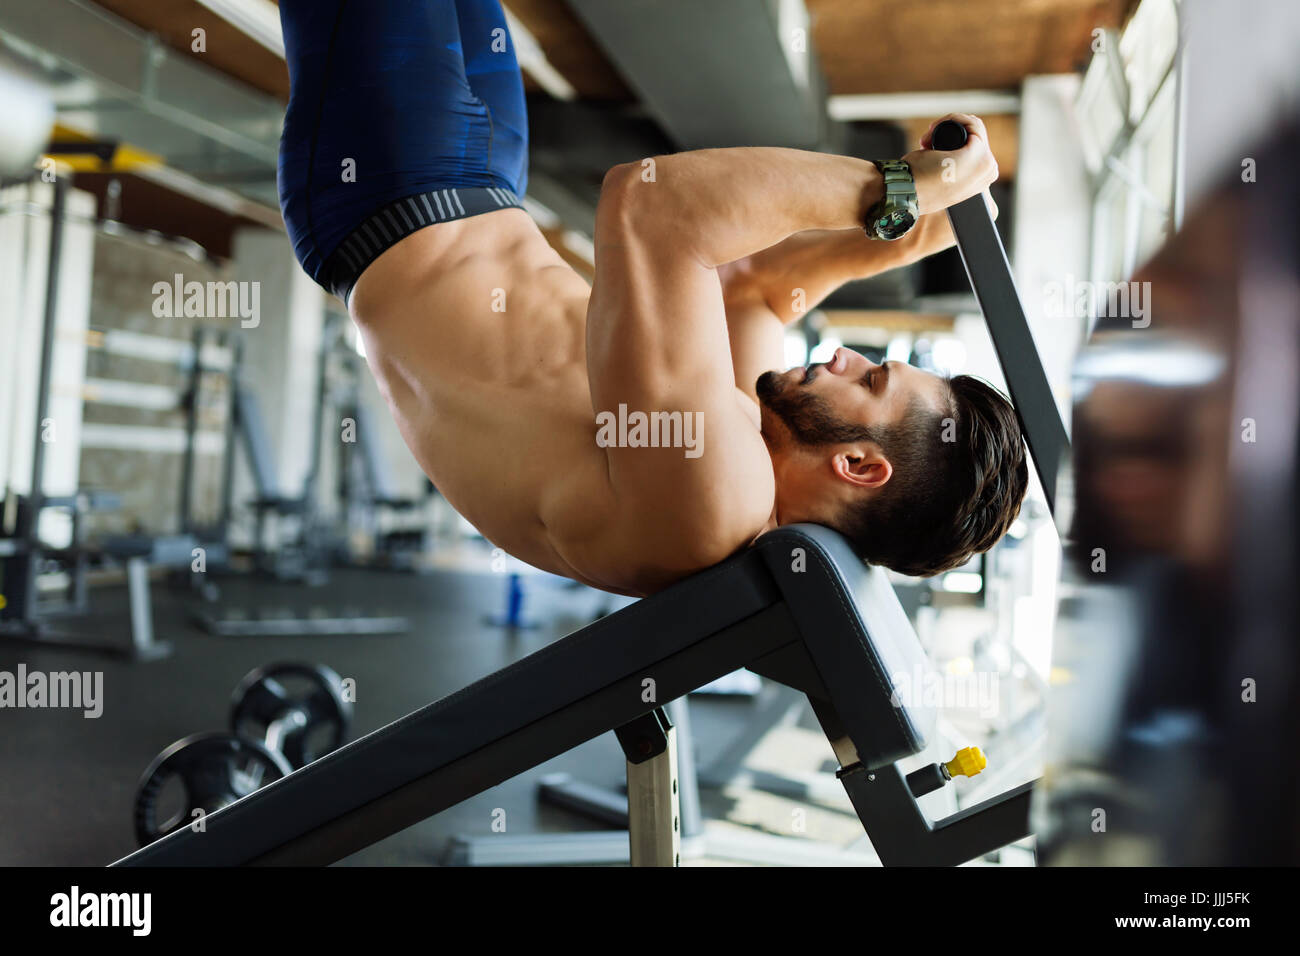 Young handsome man doing exercise for abdominal muscles Stock Photo